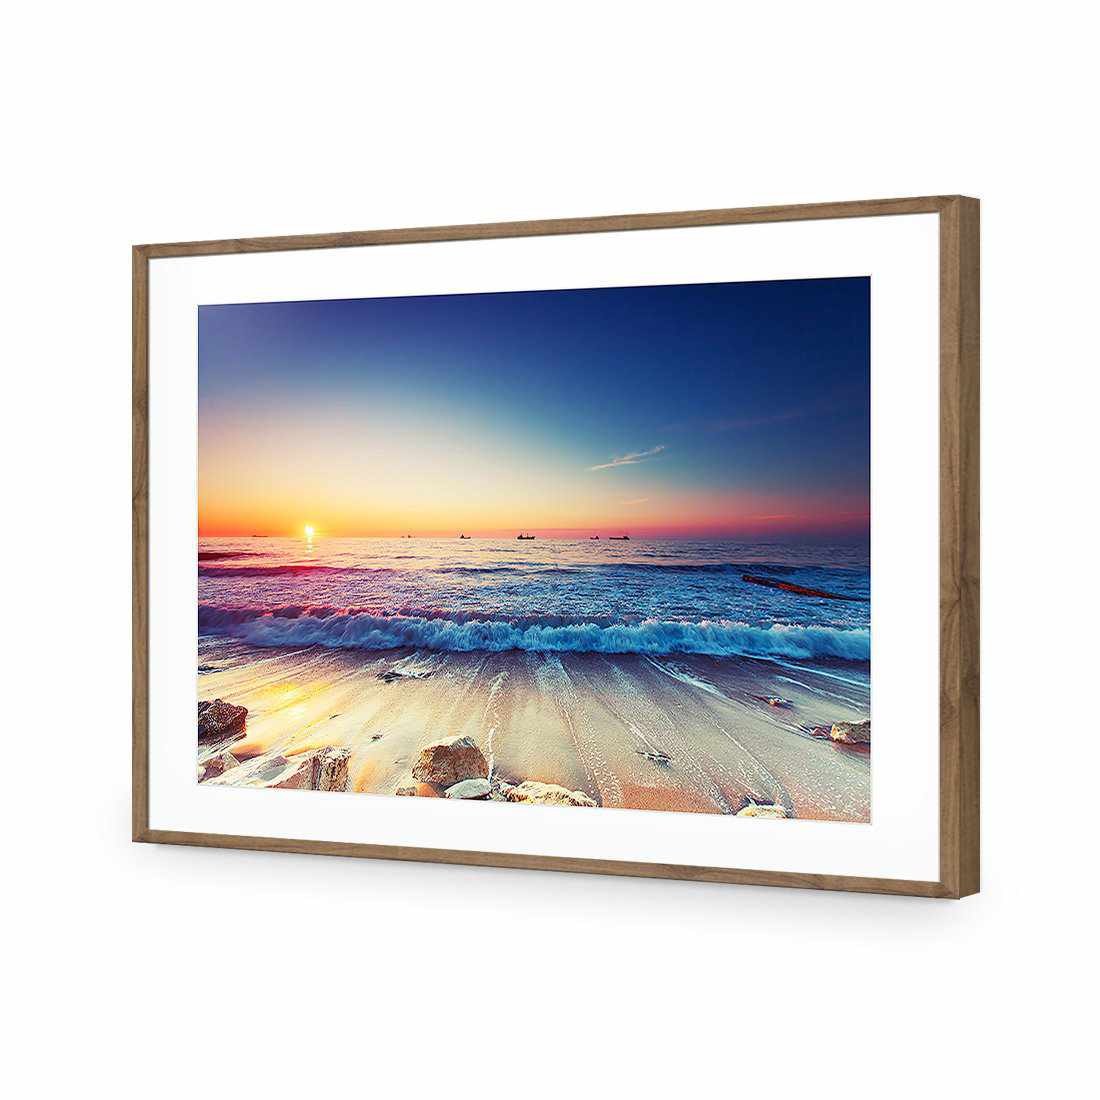 High Tide Sunset-Acrylic-Wall Art Design-With Border-Acrylic - Natural Frame-45x30cm-Wall Art Designs